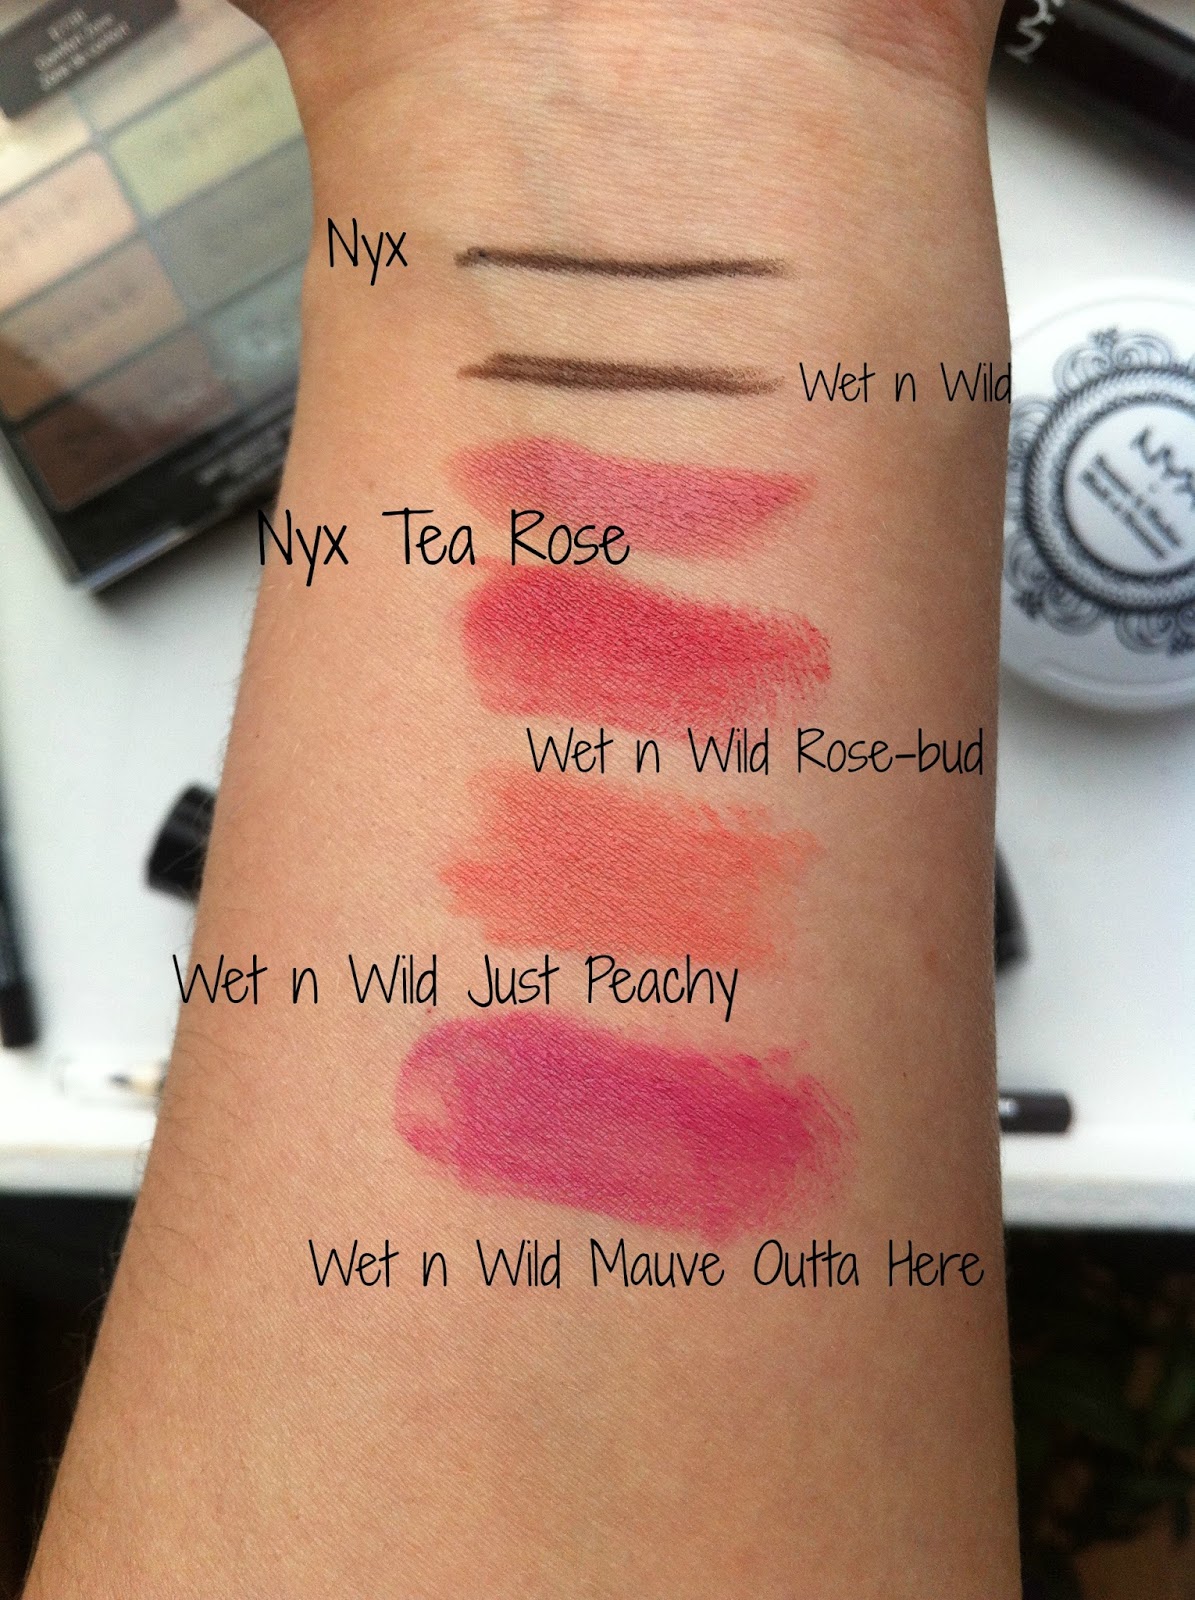 Nyx Wet n Wild swatches lipstick eyeliner brown tea rose rose bud just peachy mauve outta here